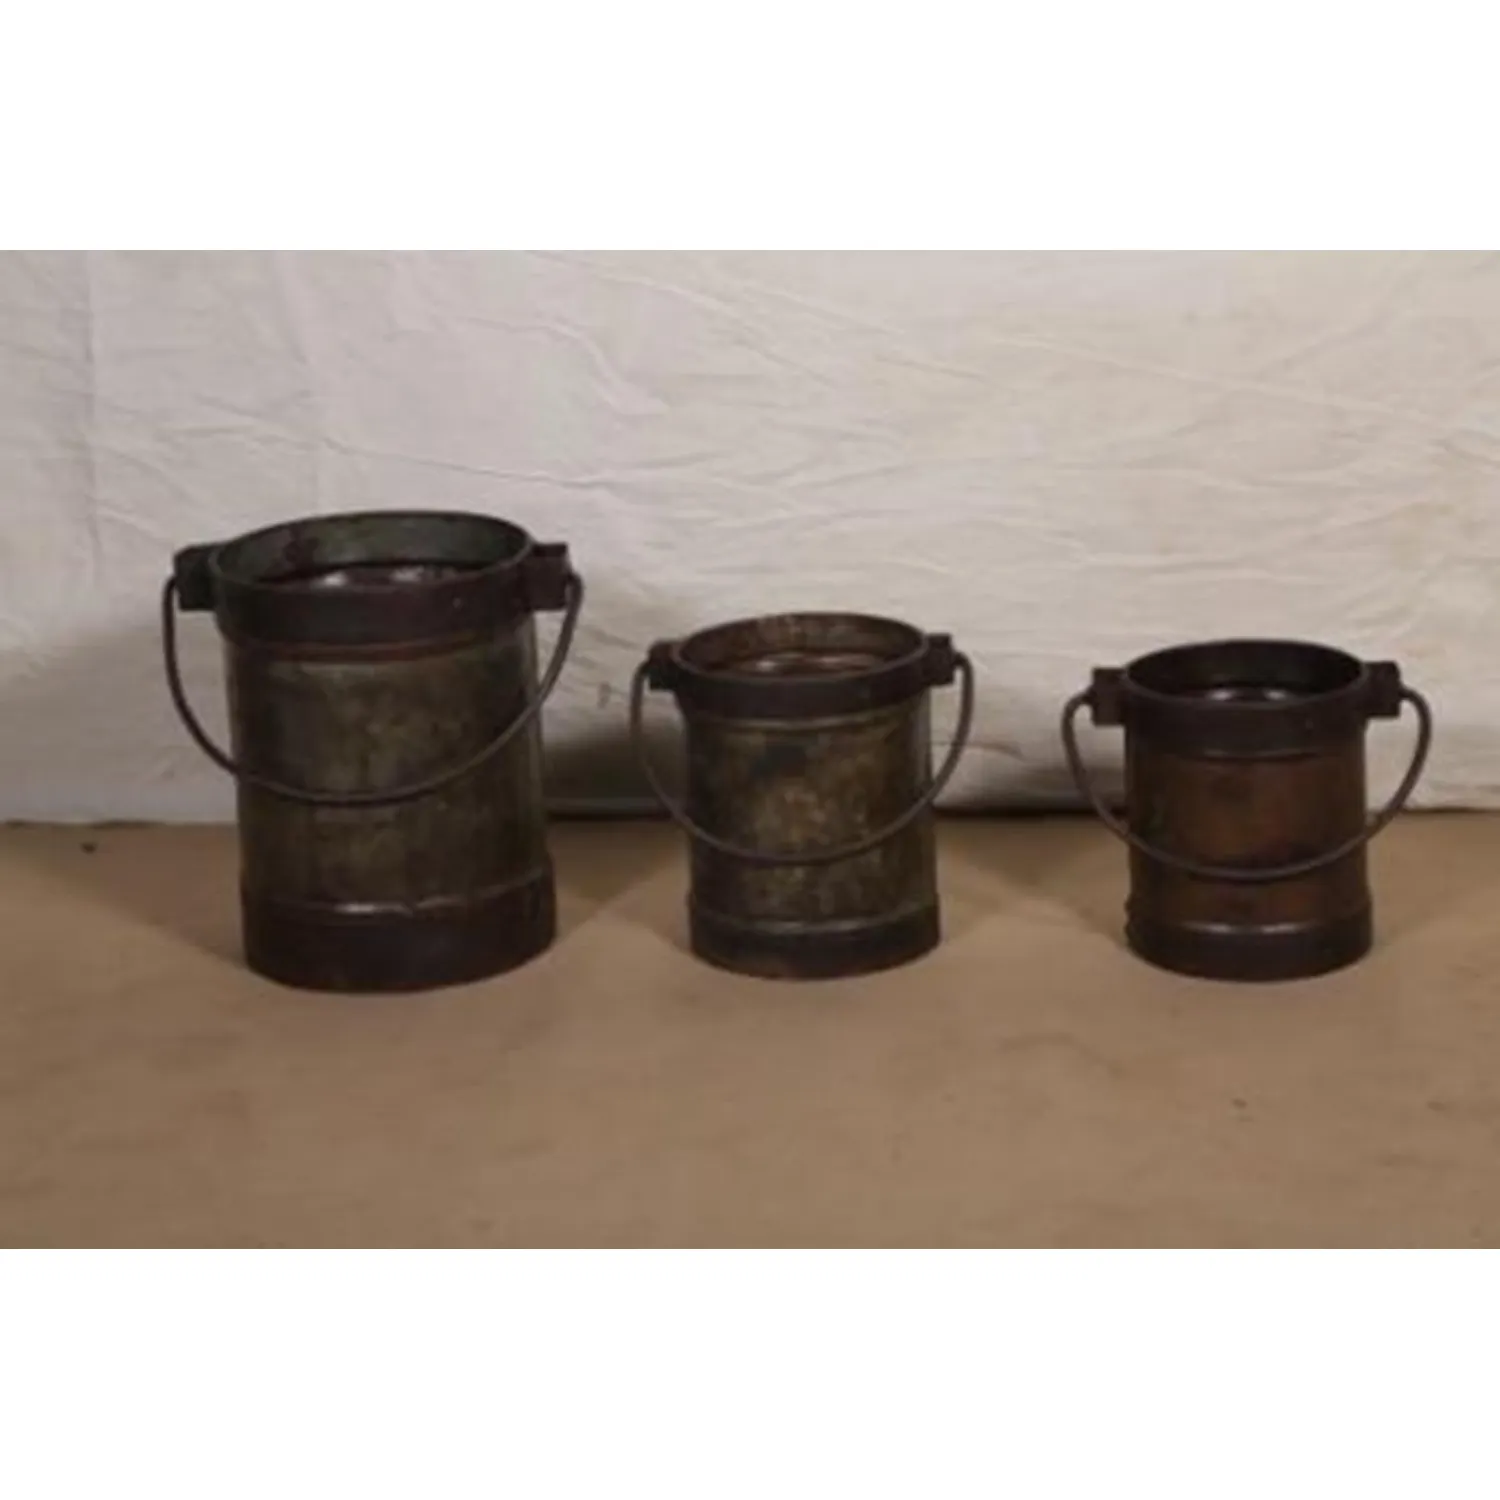 Set of 3 Antique Iron Robust Floor Standing Tubs Planter